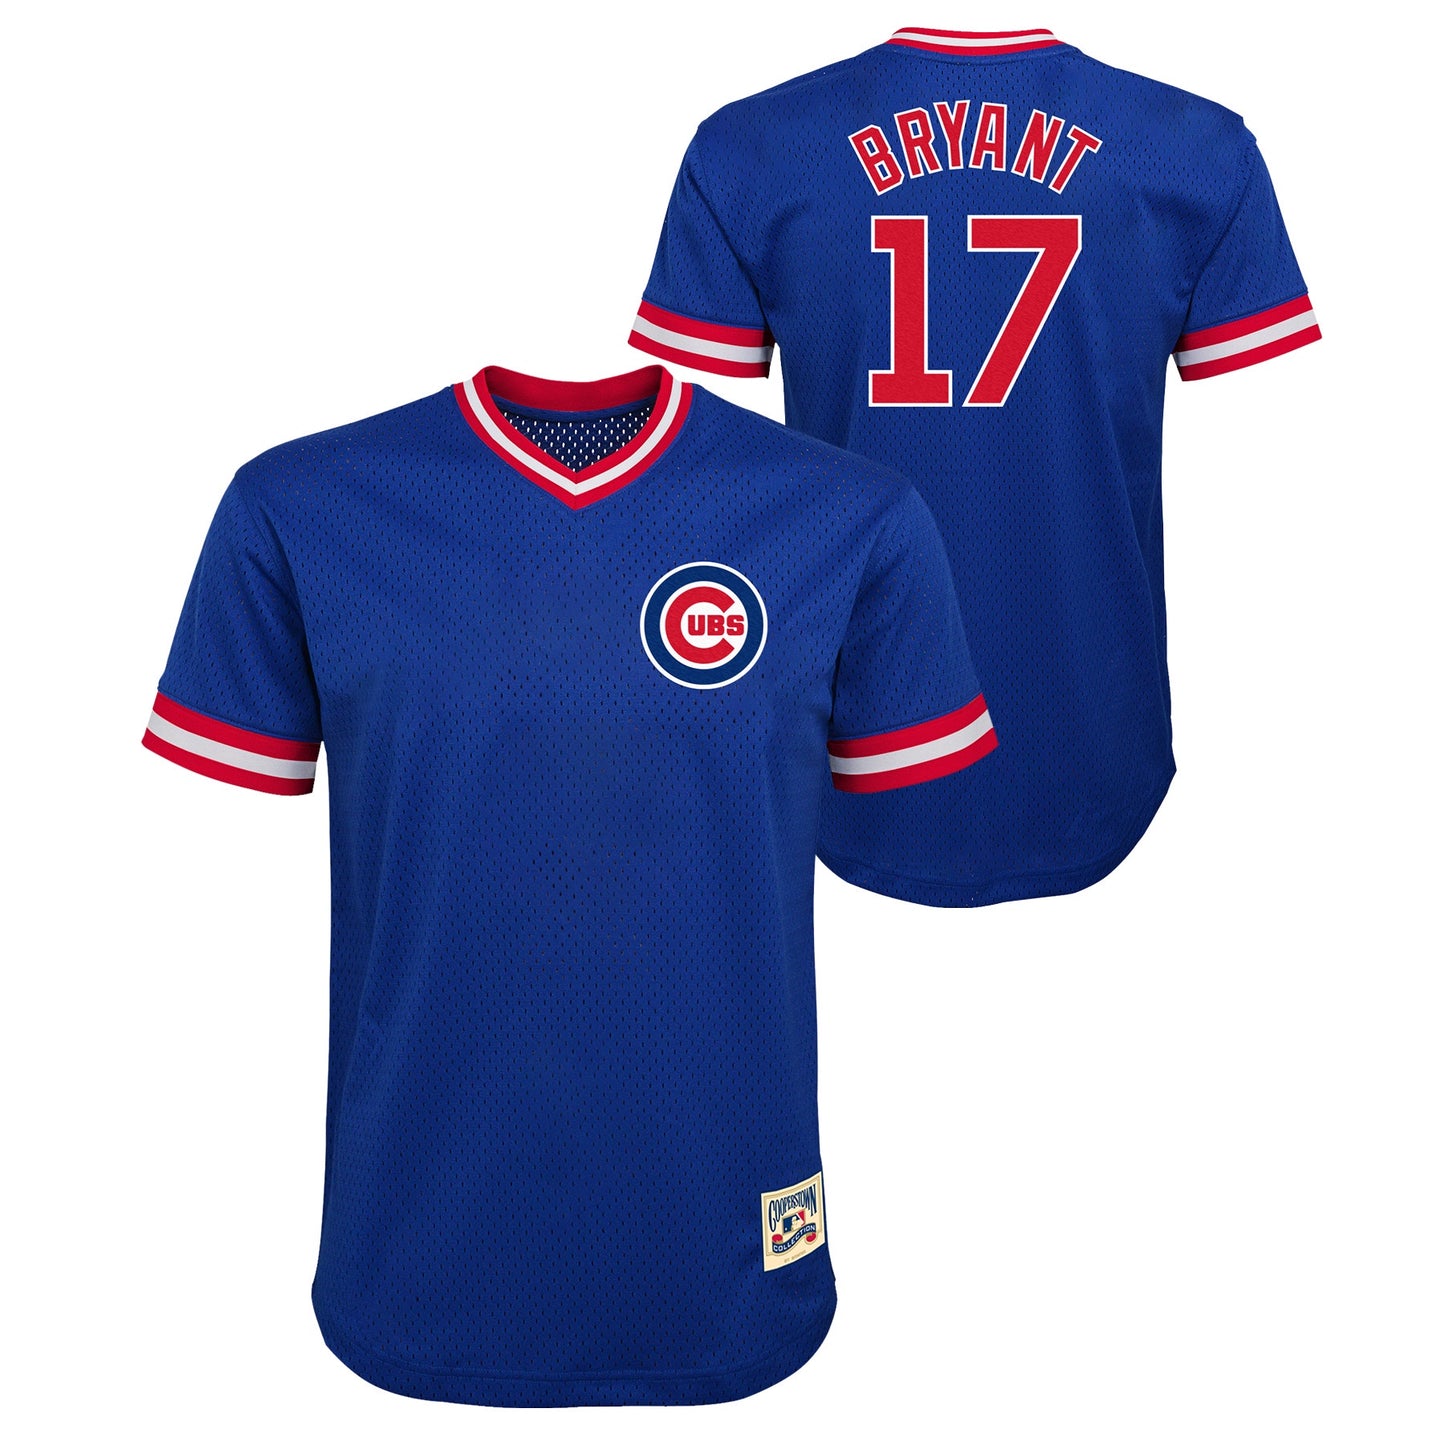 Youth Kris Bryant Chicago Cubs Cooperstown Cooperstown Collection Blue V-Neck Mesh Jersey